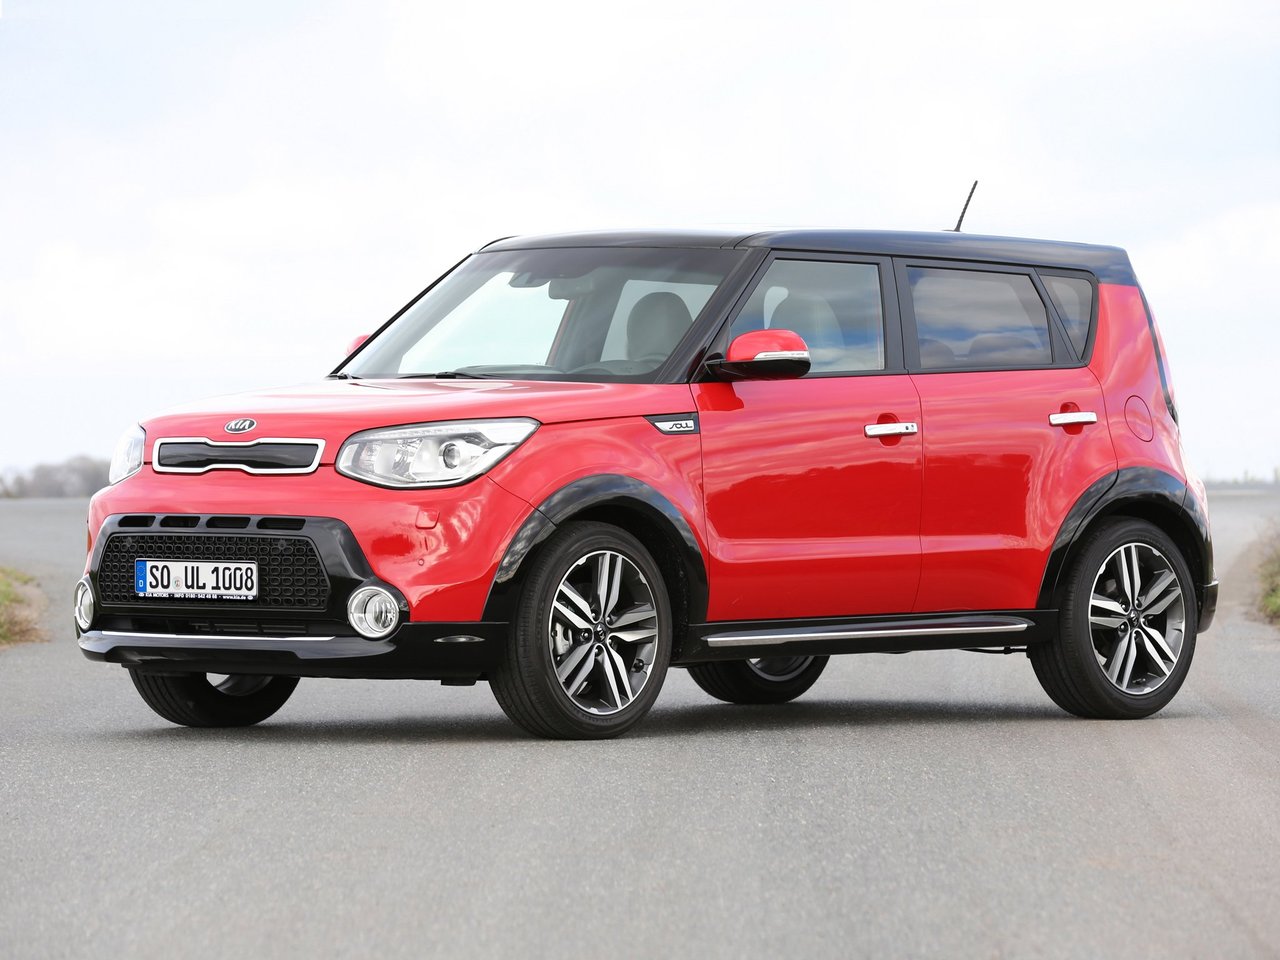 Kia Soul technical specifications and fuel economy